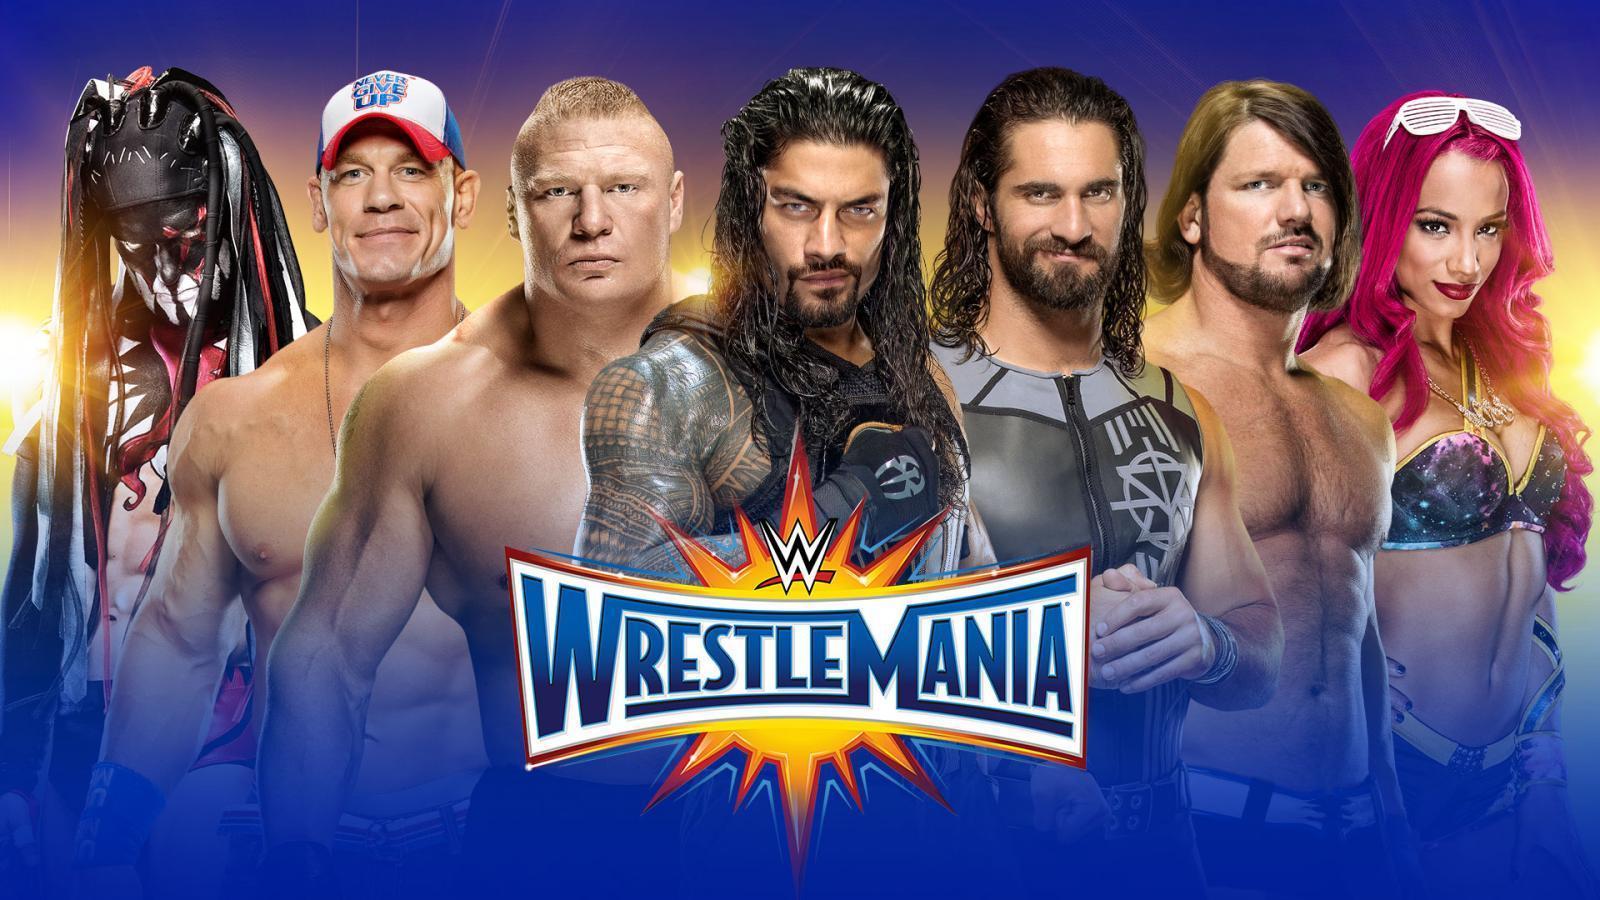 WWE WrestleMania 33's Stage is Officially Completed (Video)